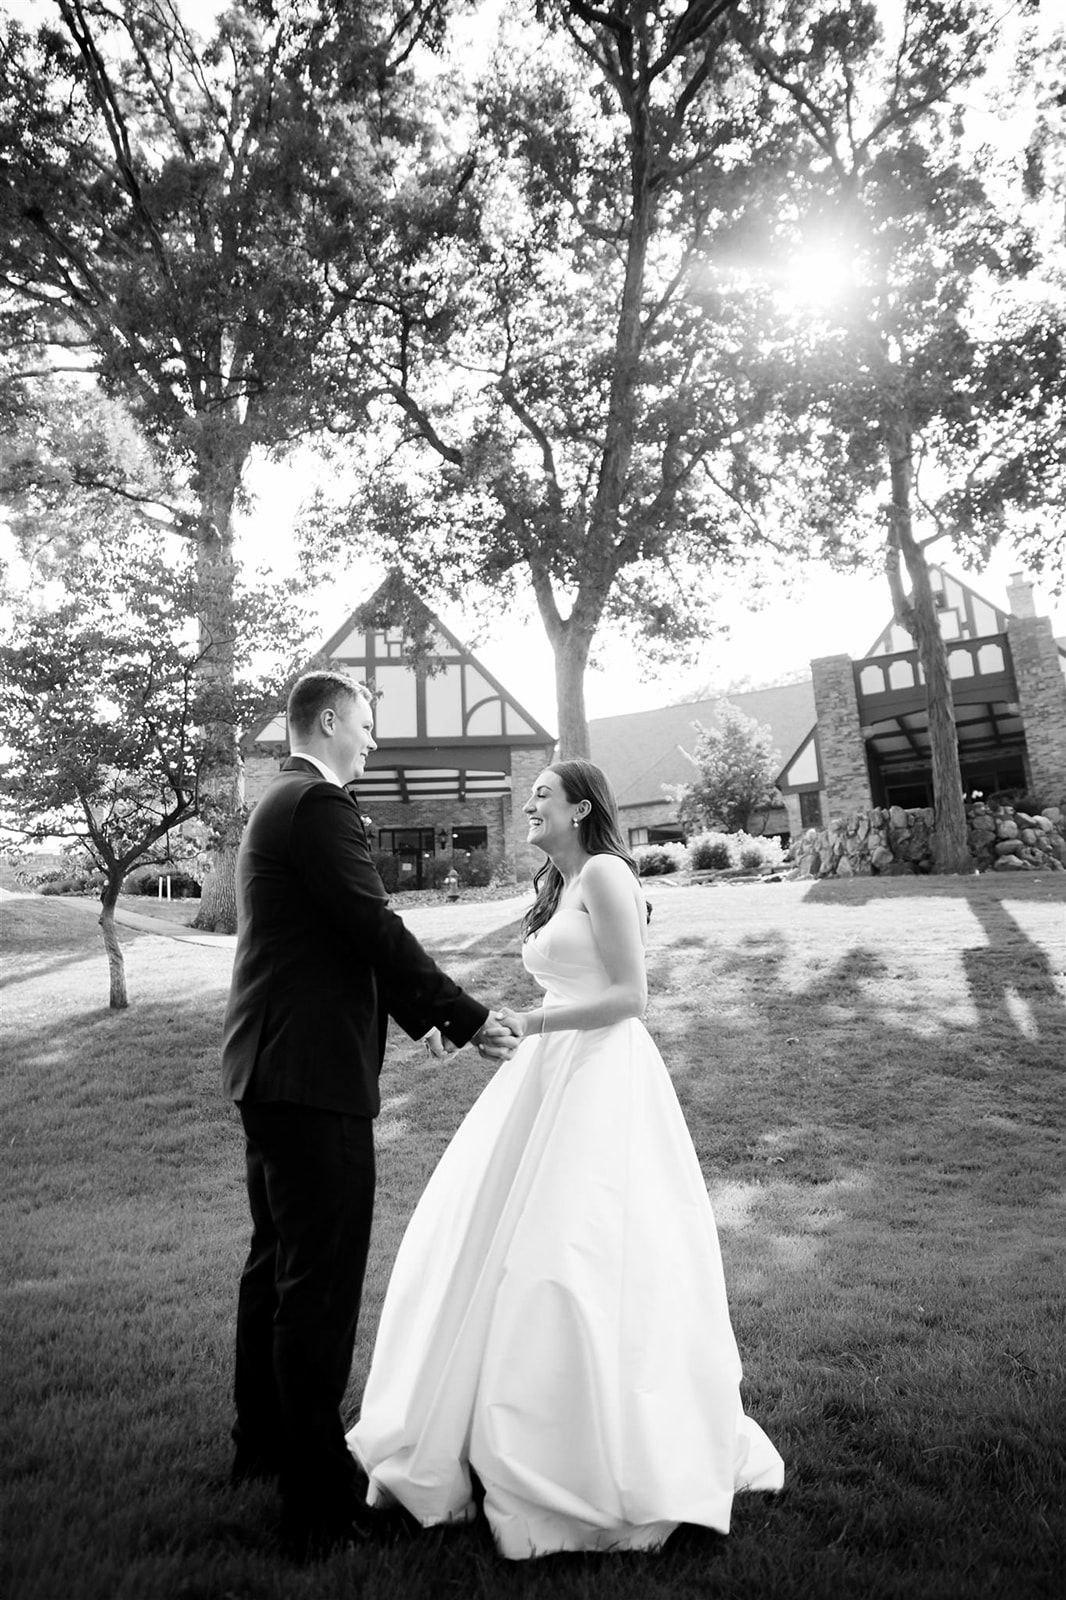 Dancing into the sunset, the bride and groom share a romantic moment enveloped in the warm glow of evening light.